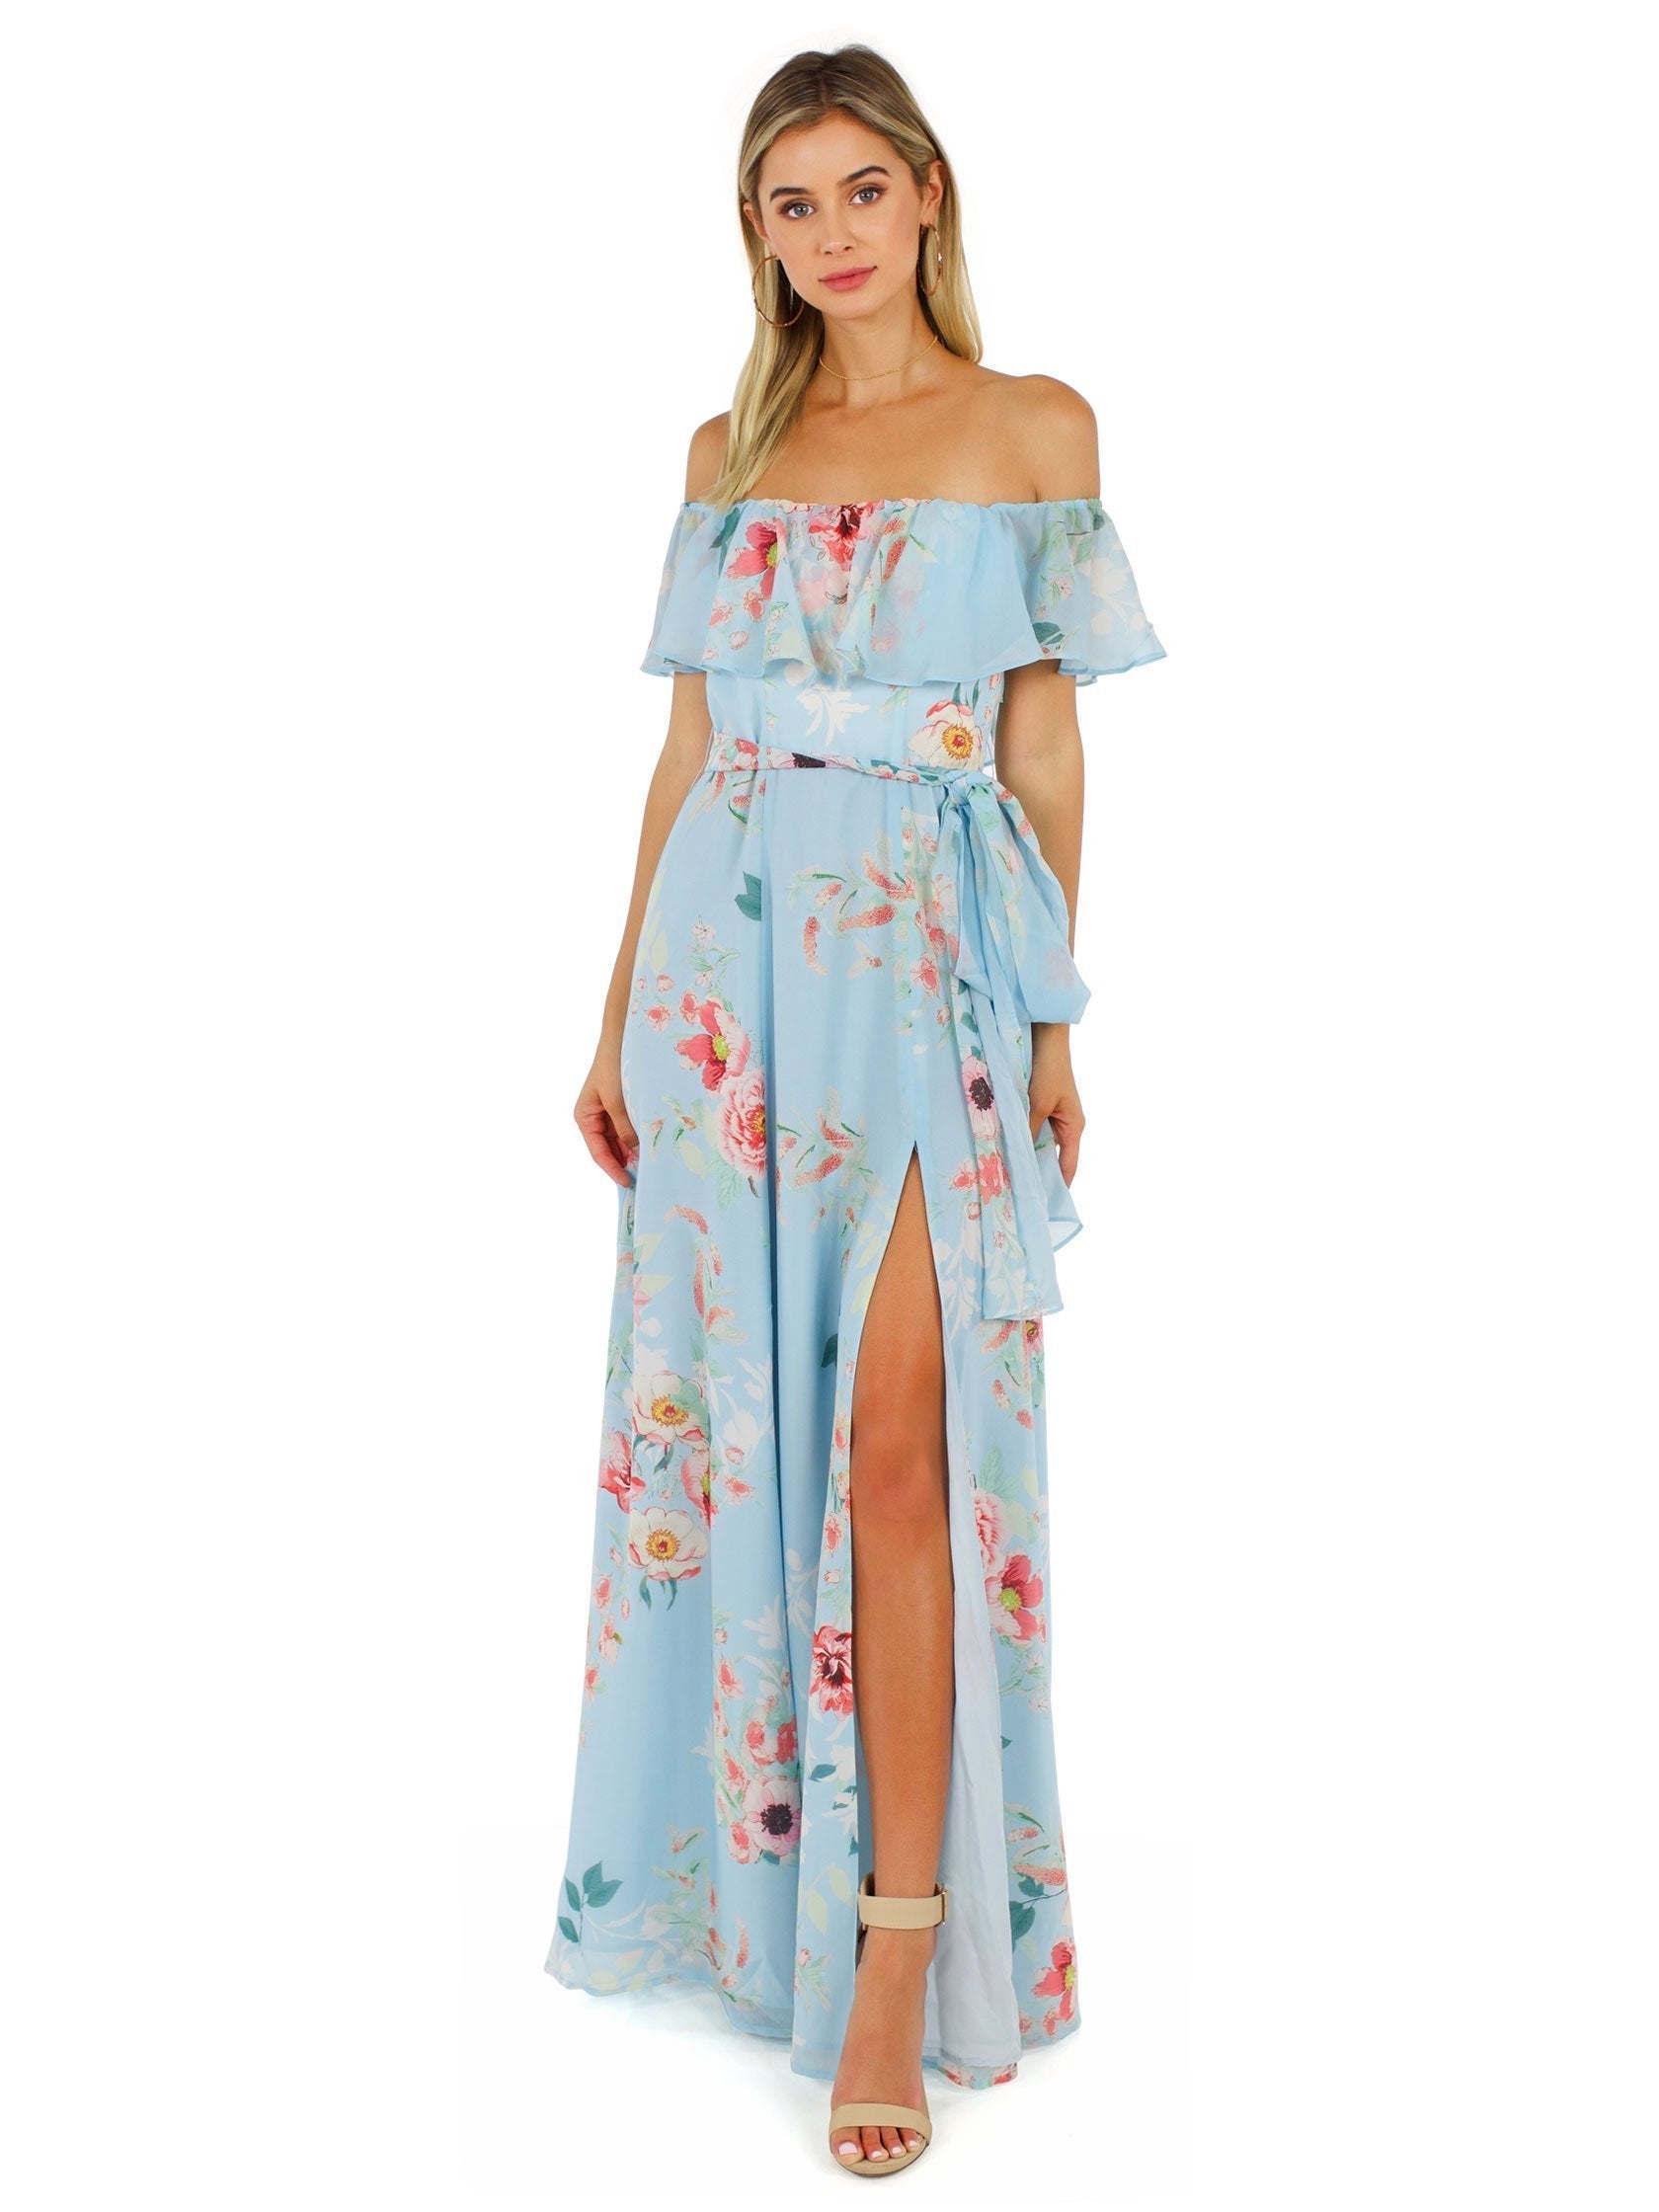 Girl outfit in a dress rental from YUMI KIM called Carmen Maxi Dress